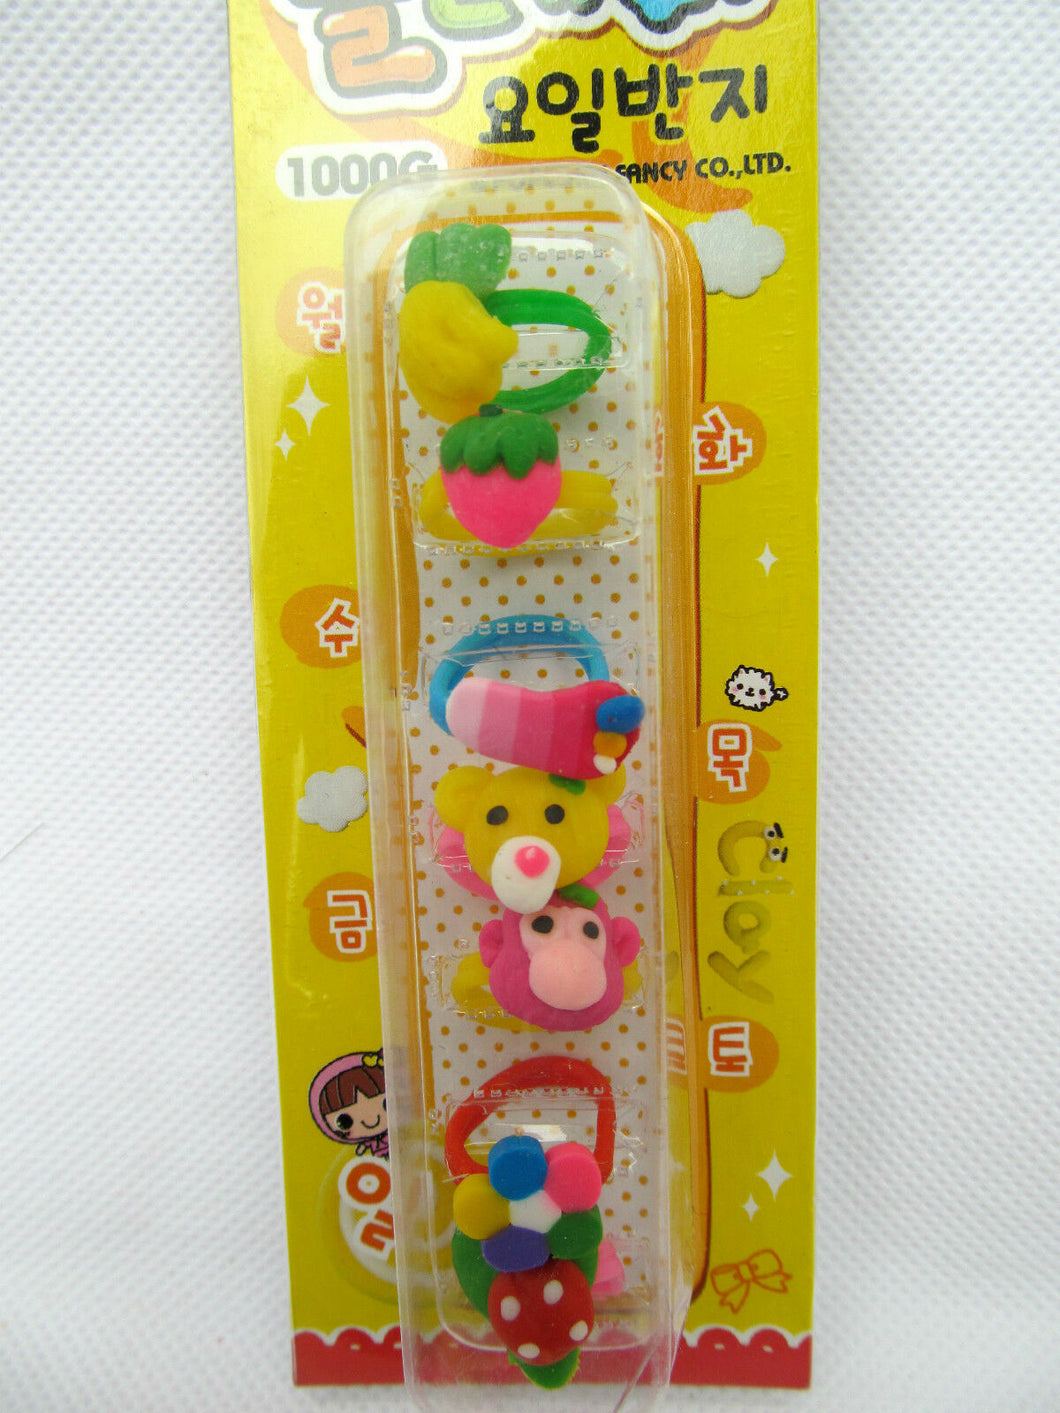 SET OF 7 CUTE GIRLS SMALL PLASTIC FASHION RINGS PARTY GIFT BAG TOYS UK SELLER